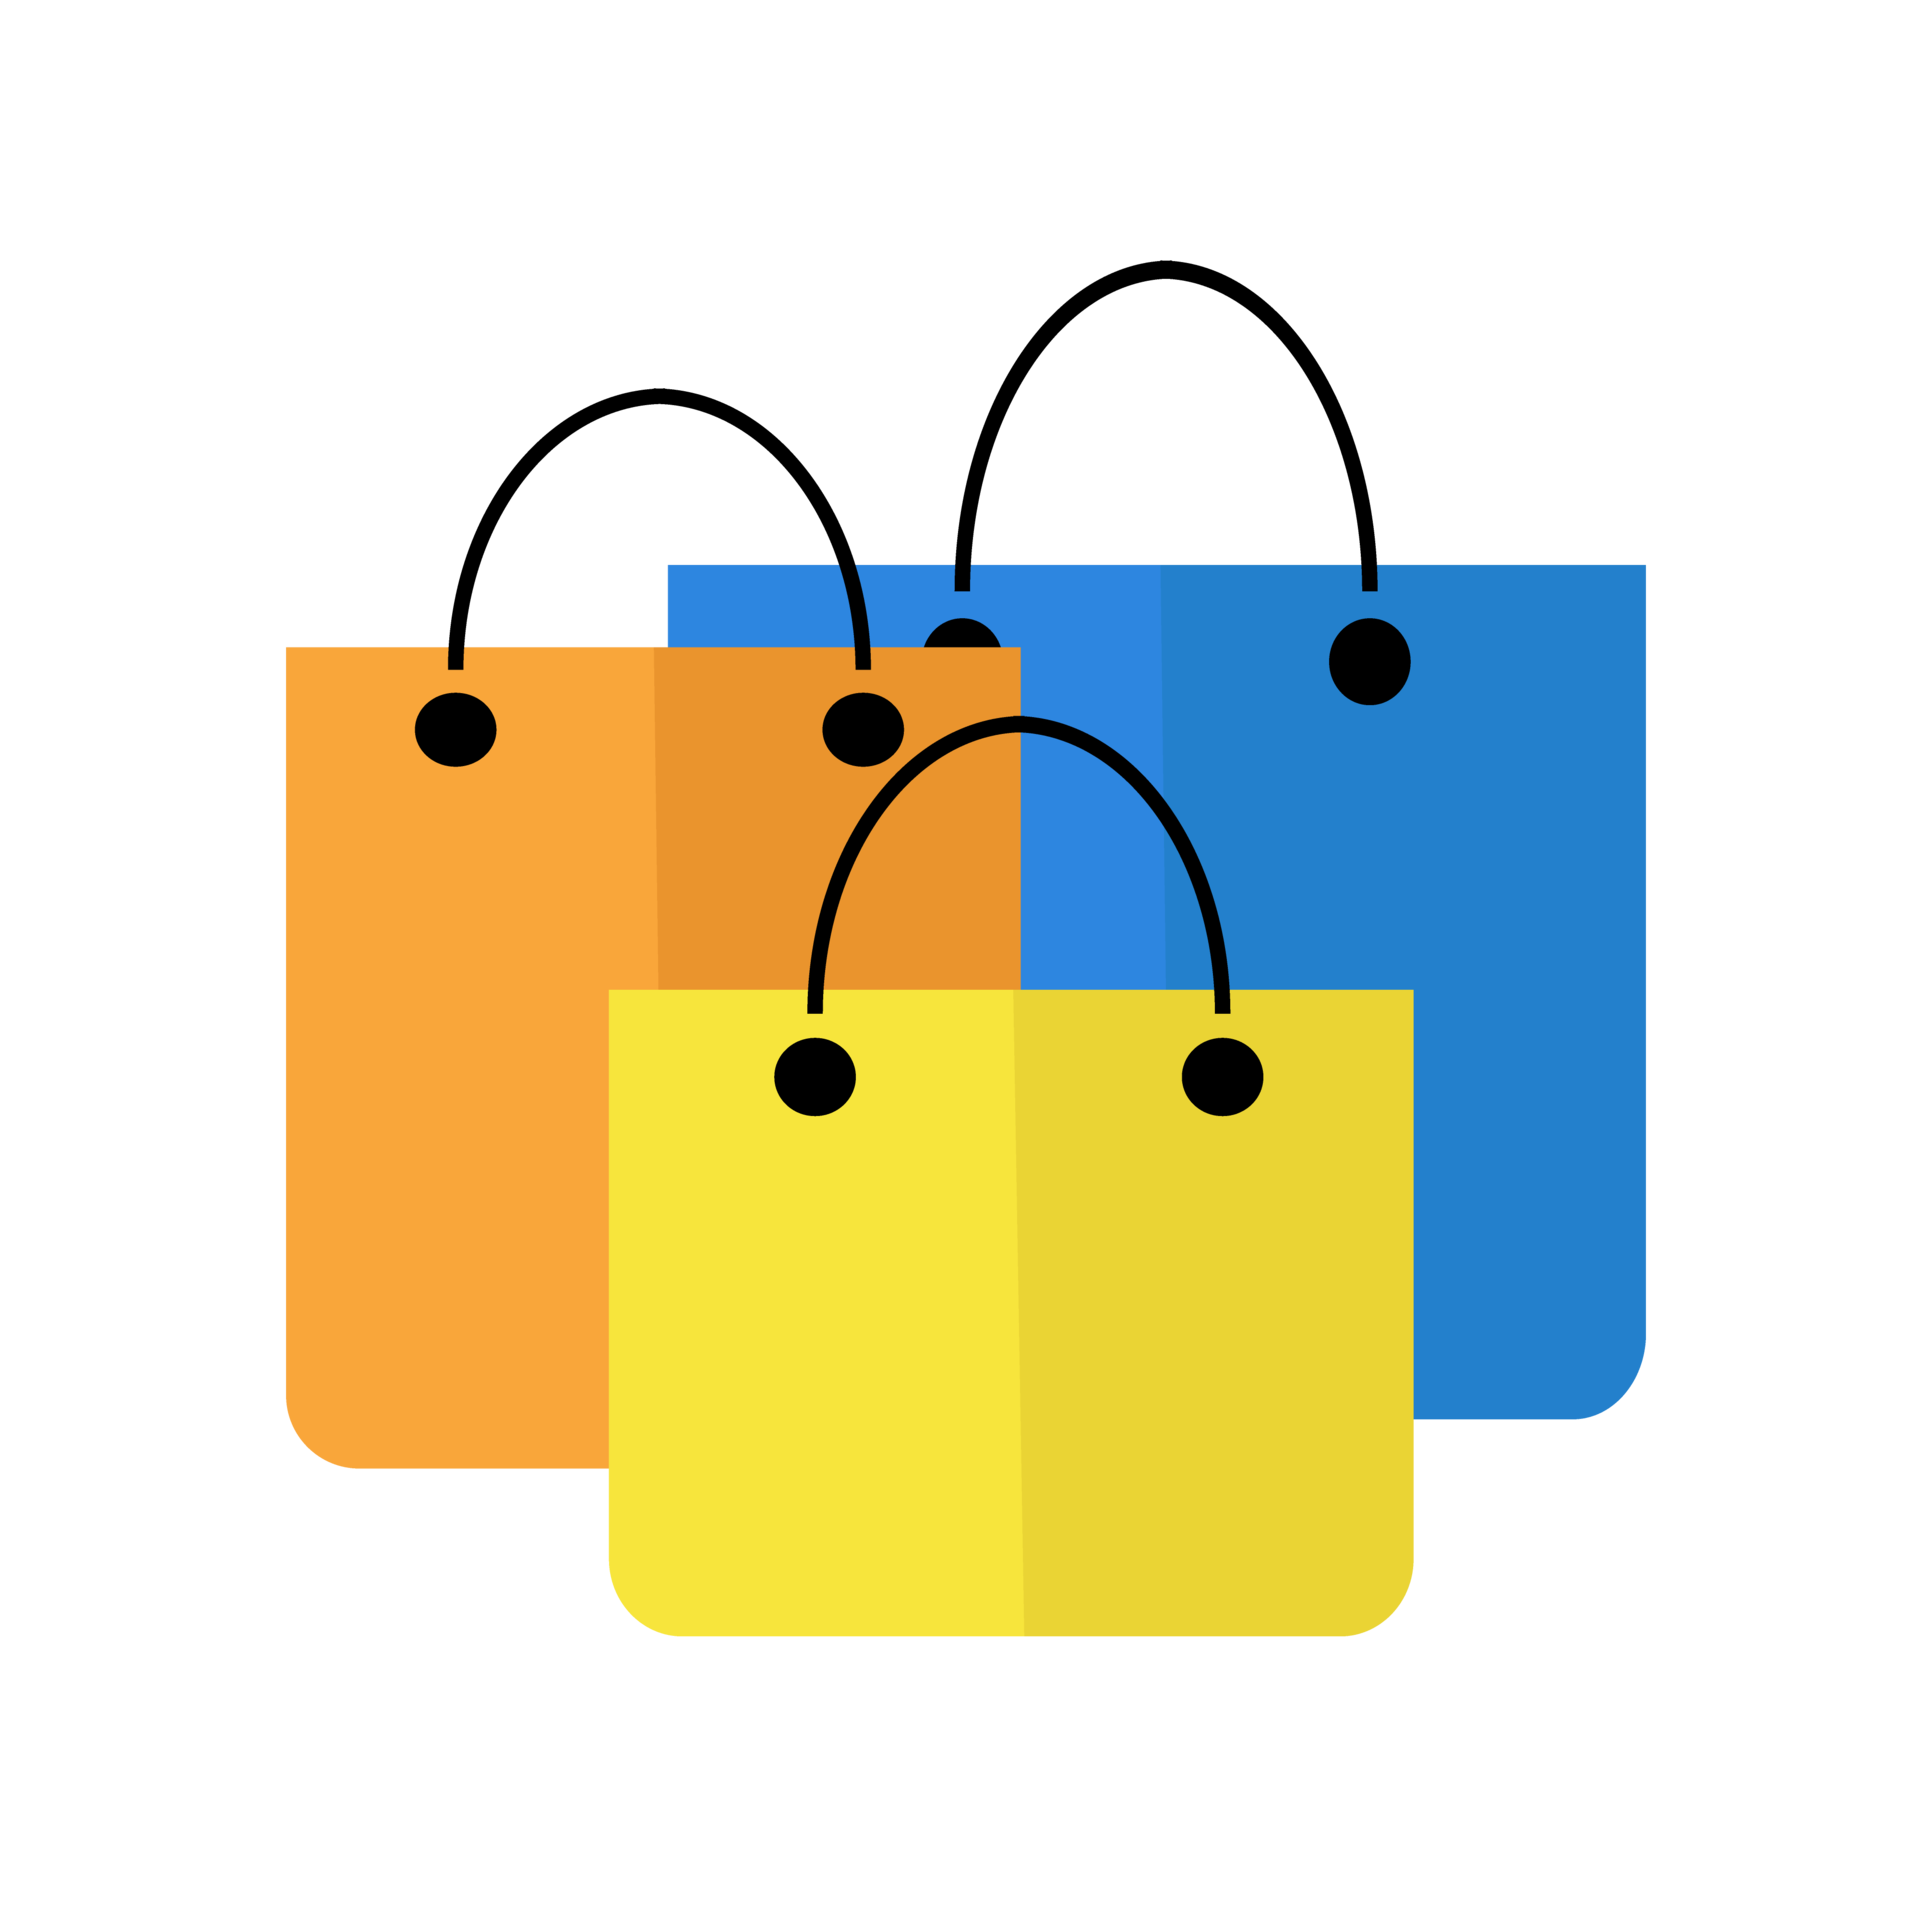 Shopping Bags Icon 19938049 PNG